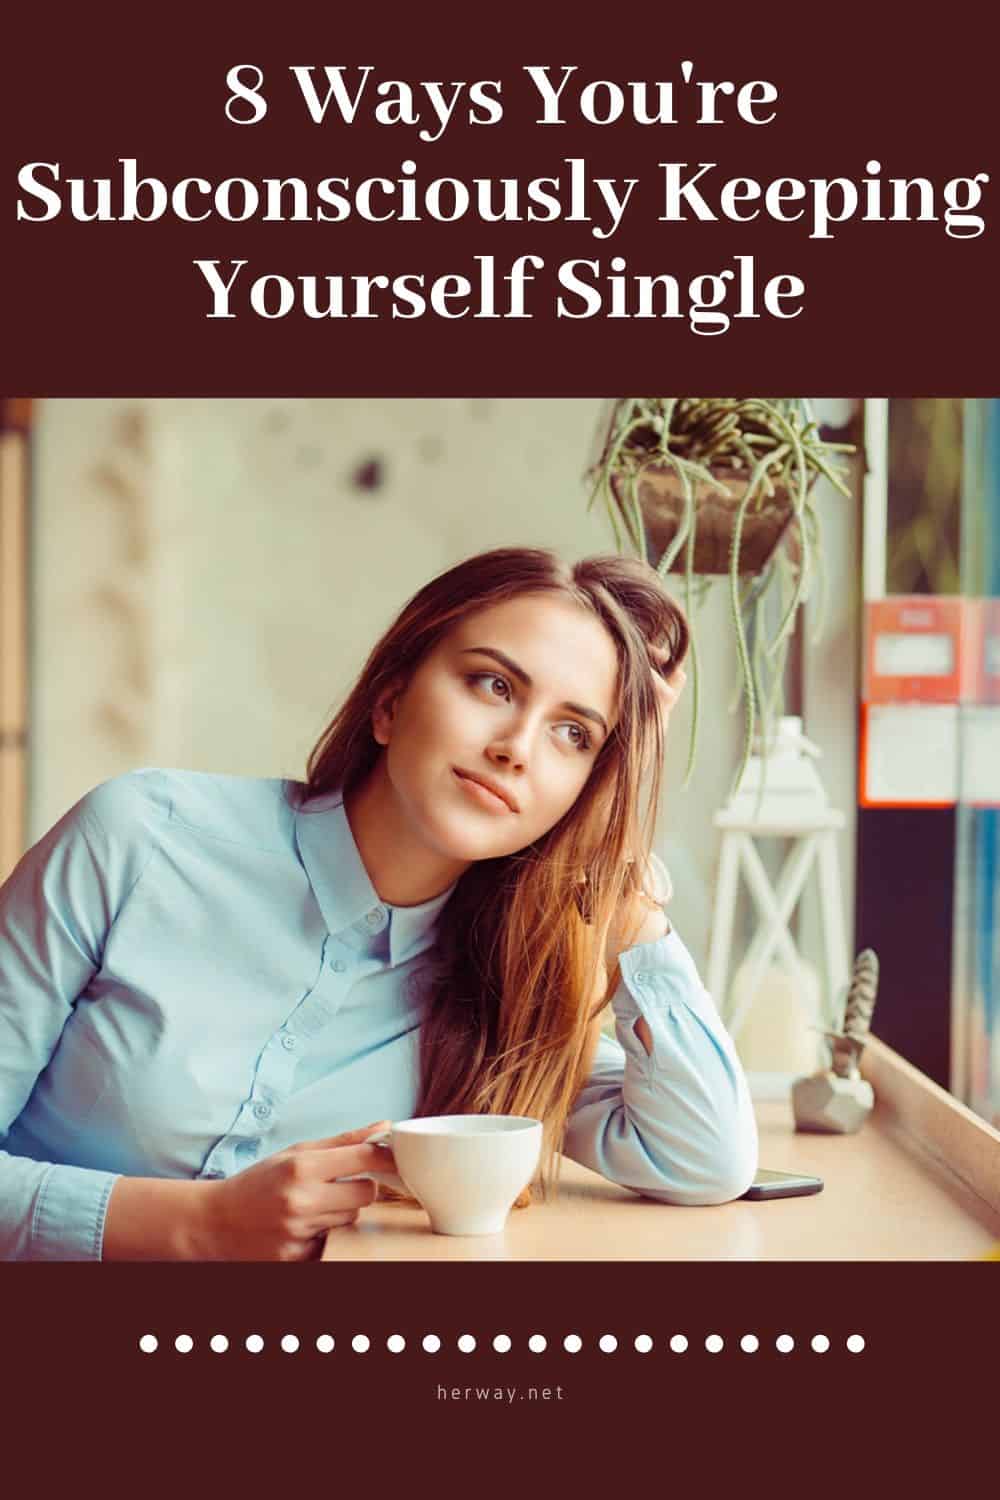 8 Ways You're Subconsciously Keeping Yourself Single